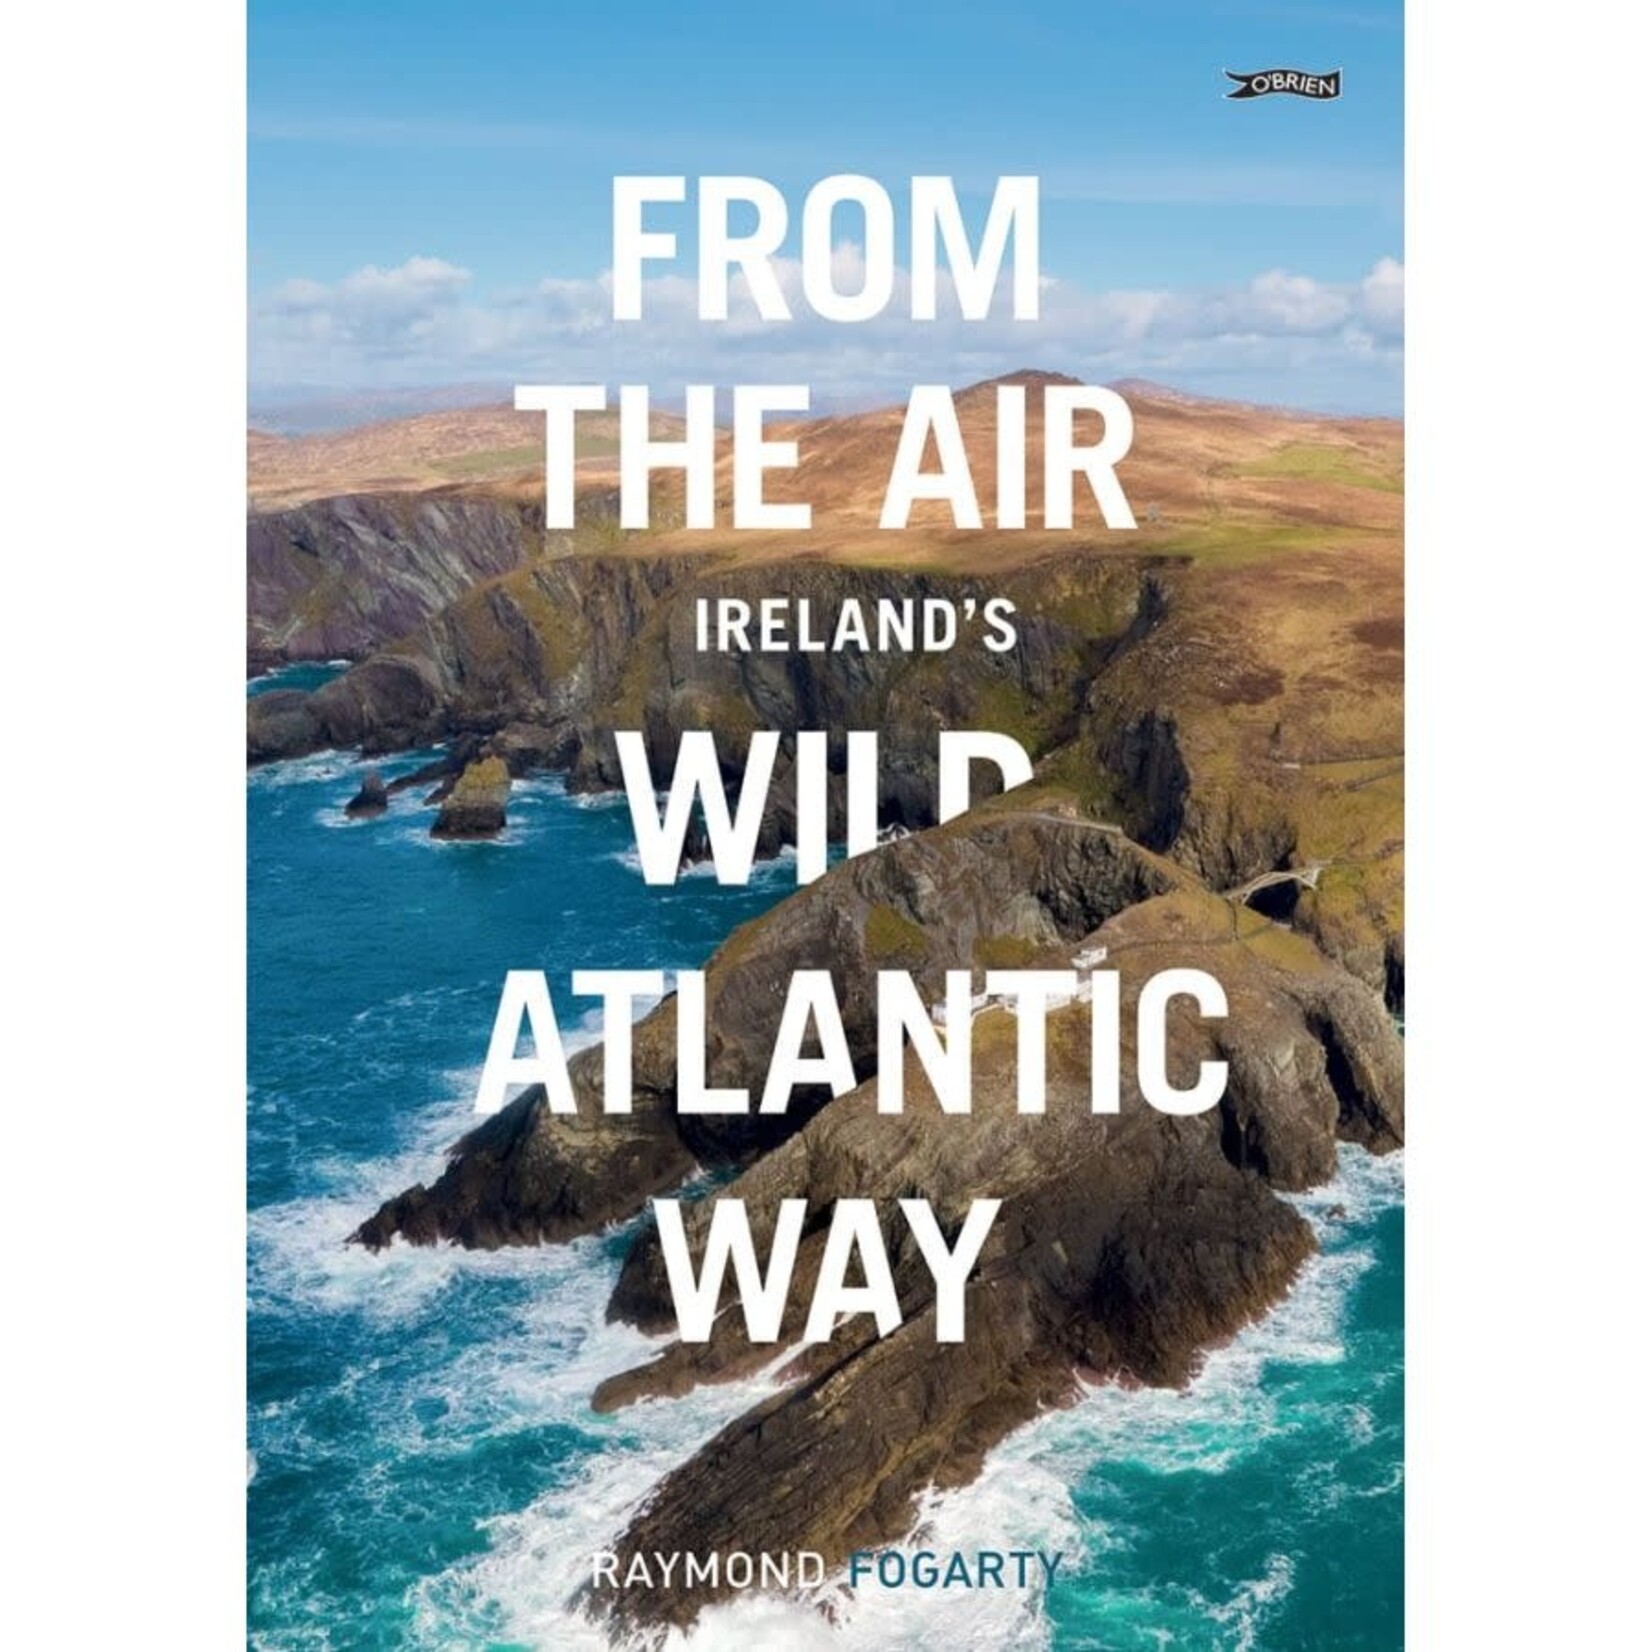 Celtic Books "From the Air: Ireland's Wild Atlantic Way"